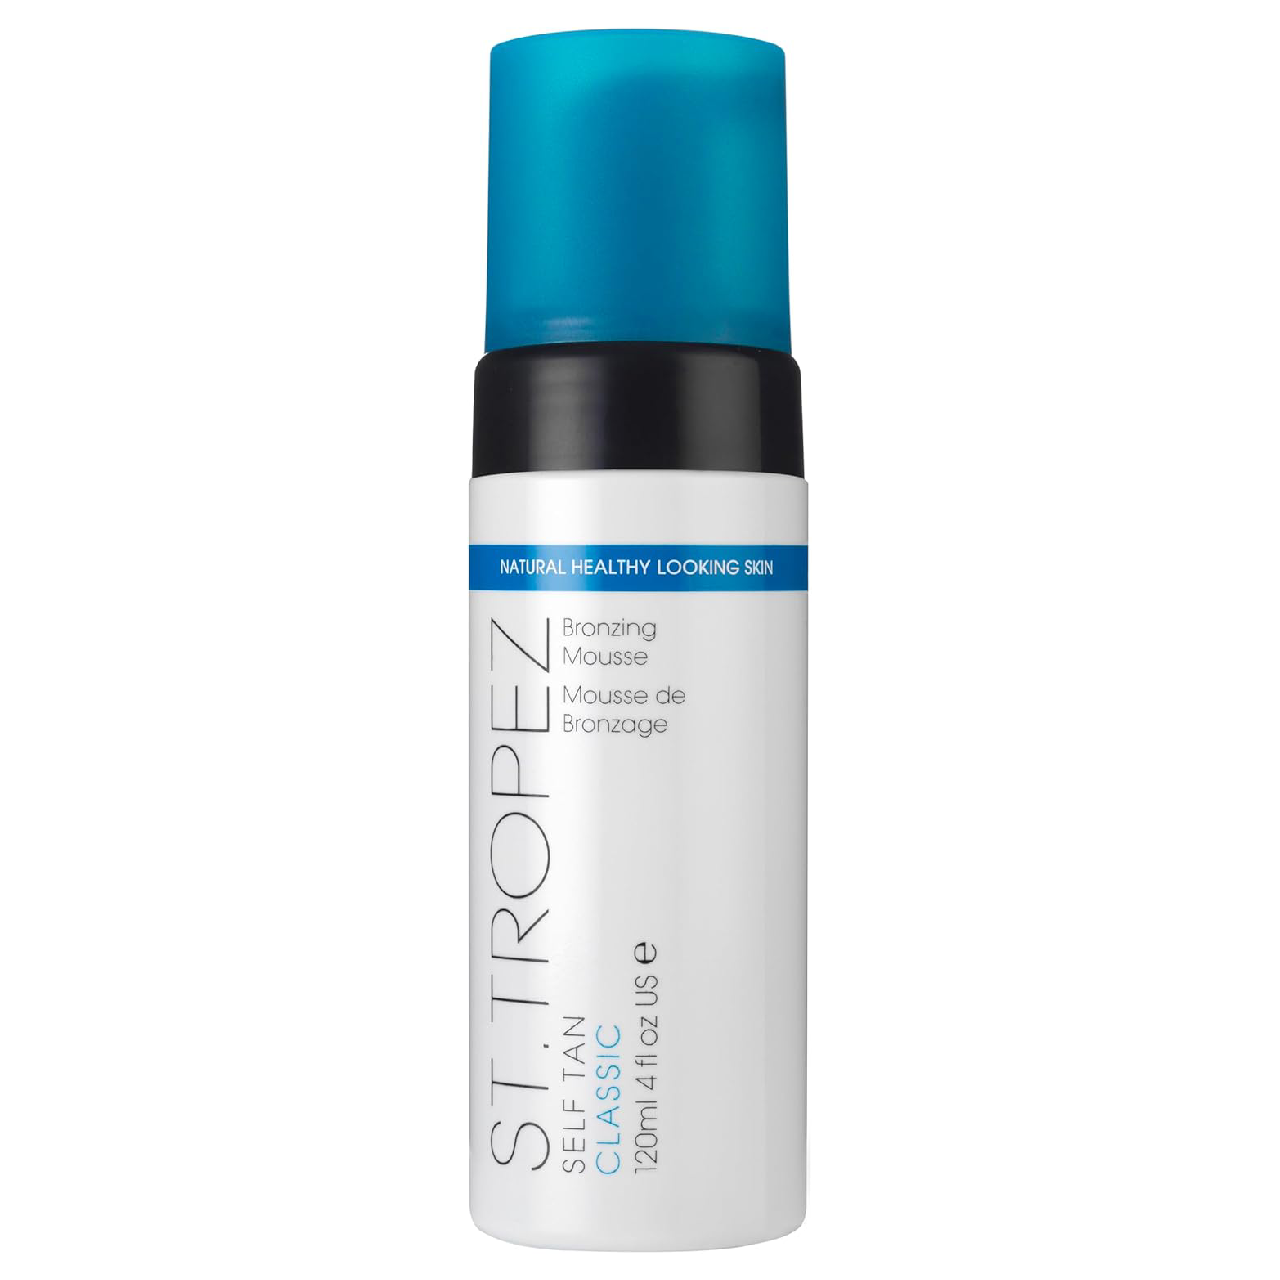 Bottle of St. Tropez Self Tan Classic Bronzing Mousse against a clean white background.